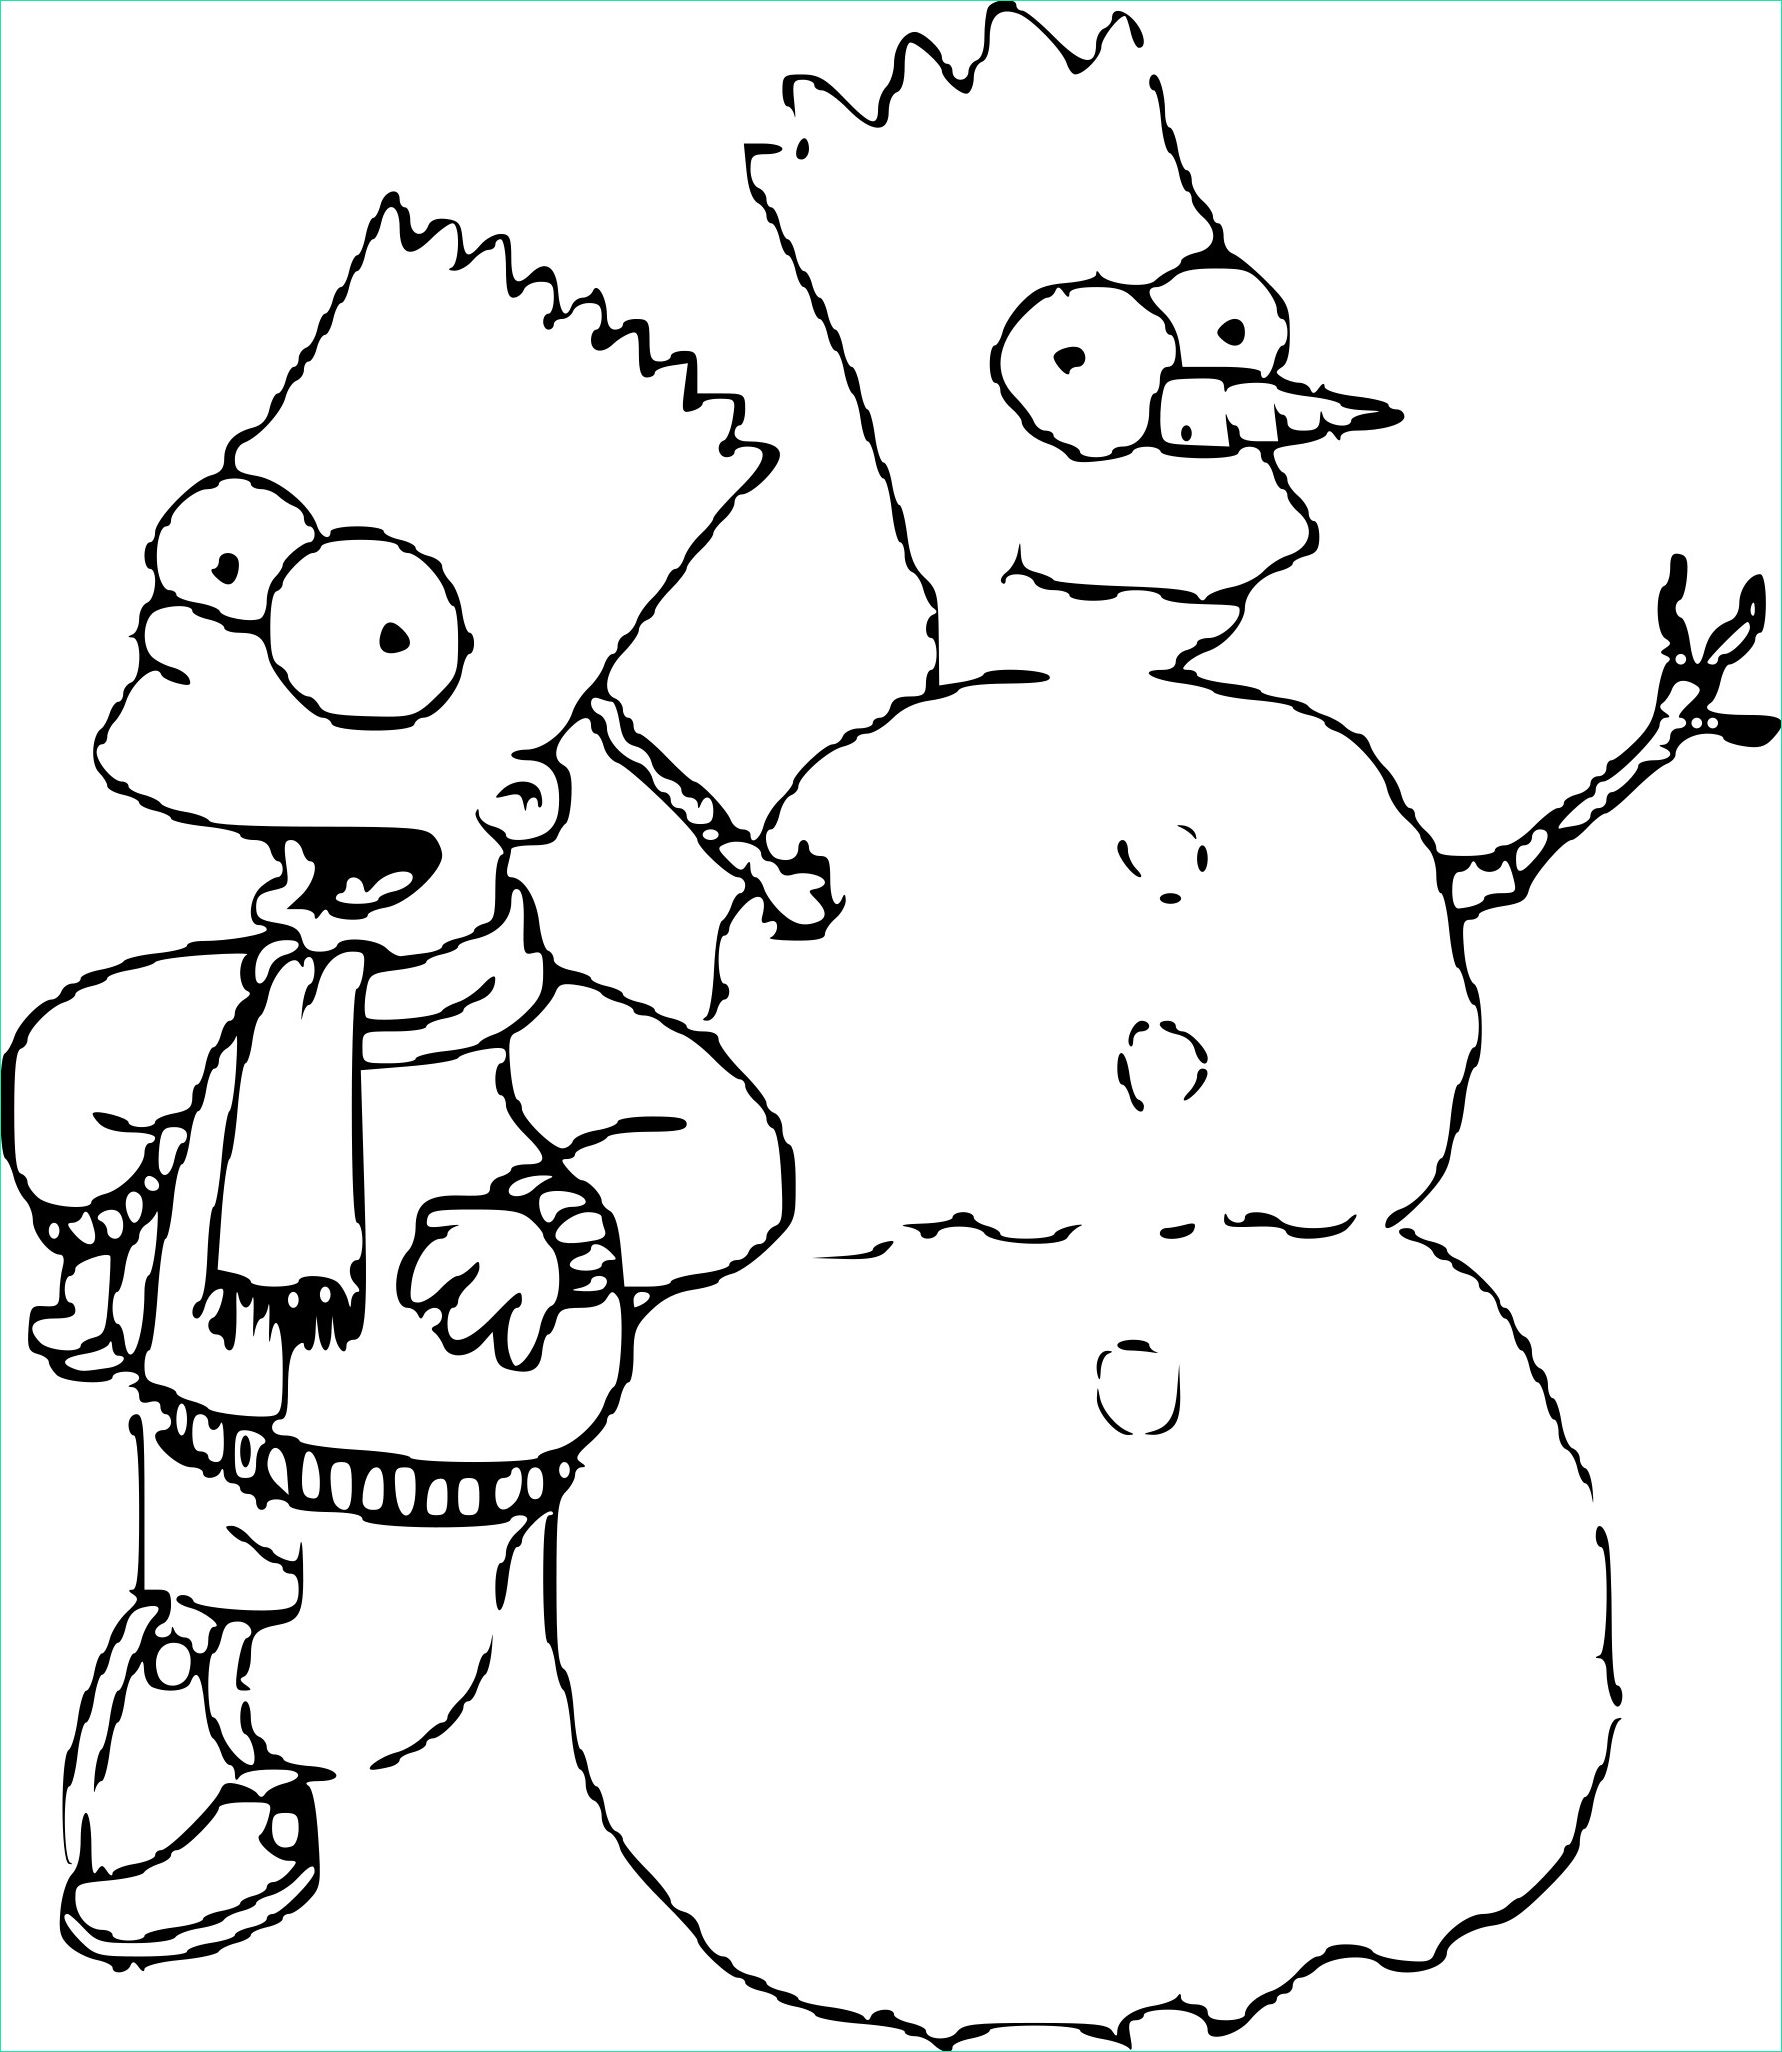 Simpson Coloriage Inspirant Images Simpson Dessin A Imprimer Related Keywords &amp; Suggestions